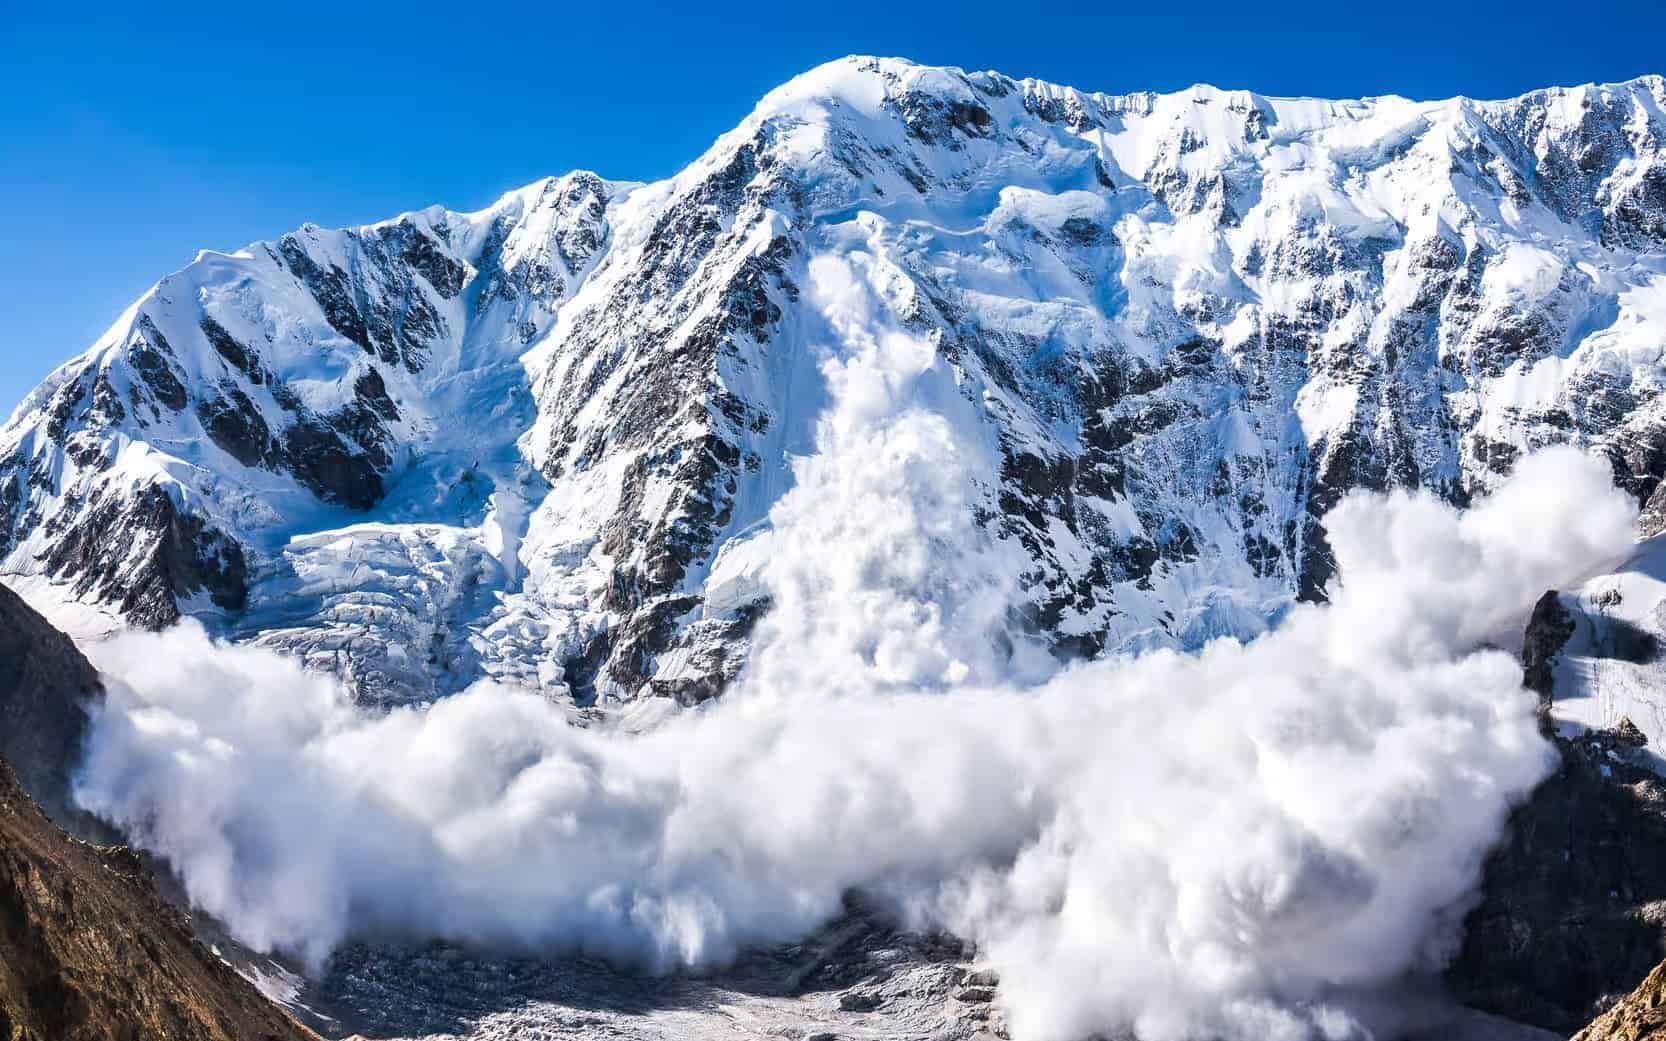 An avalanche thunders down a mountain in France